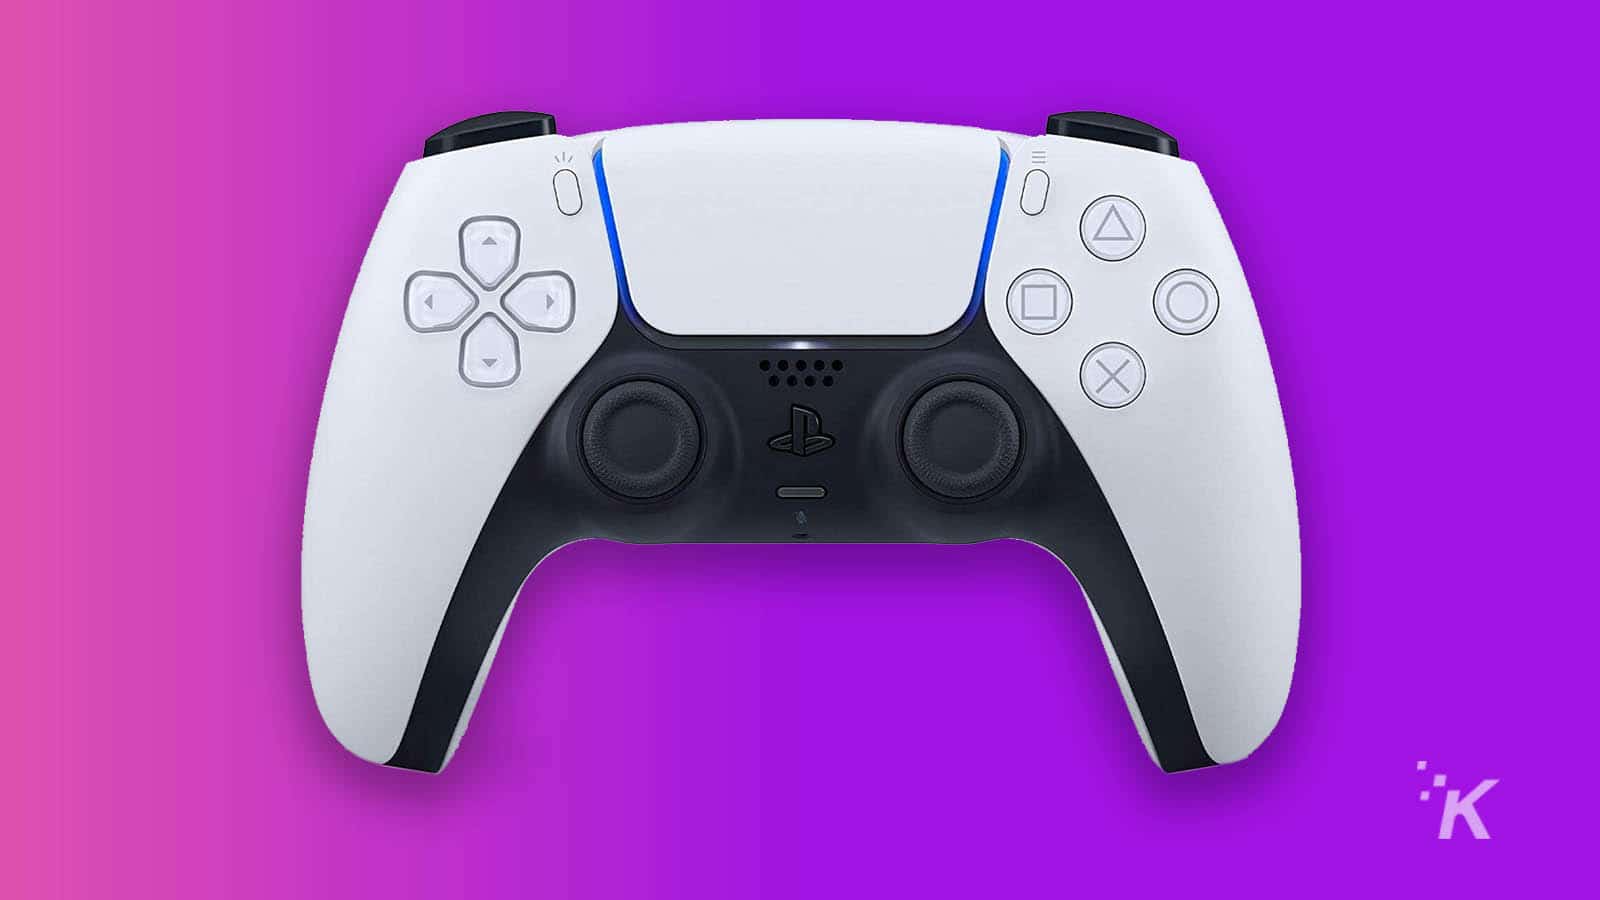 sony playstation 5 dualsense controller on purple background